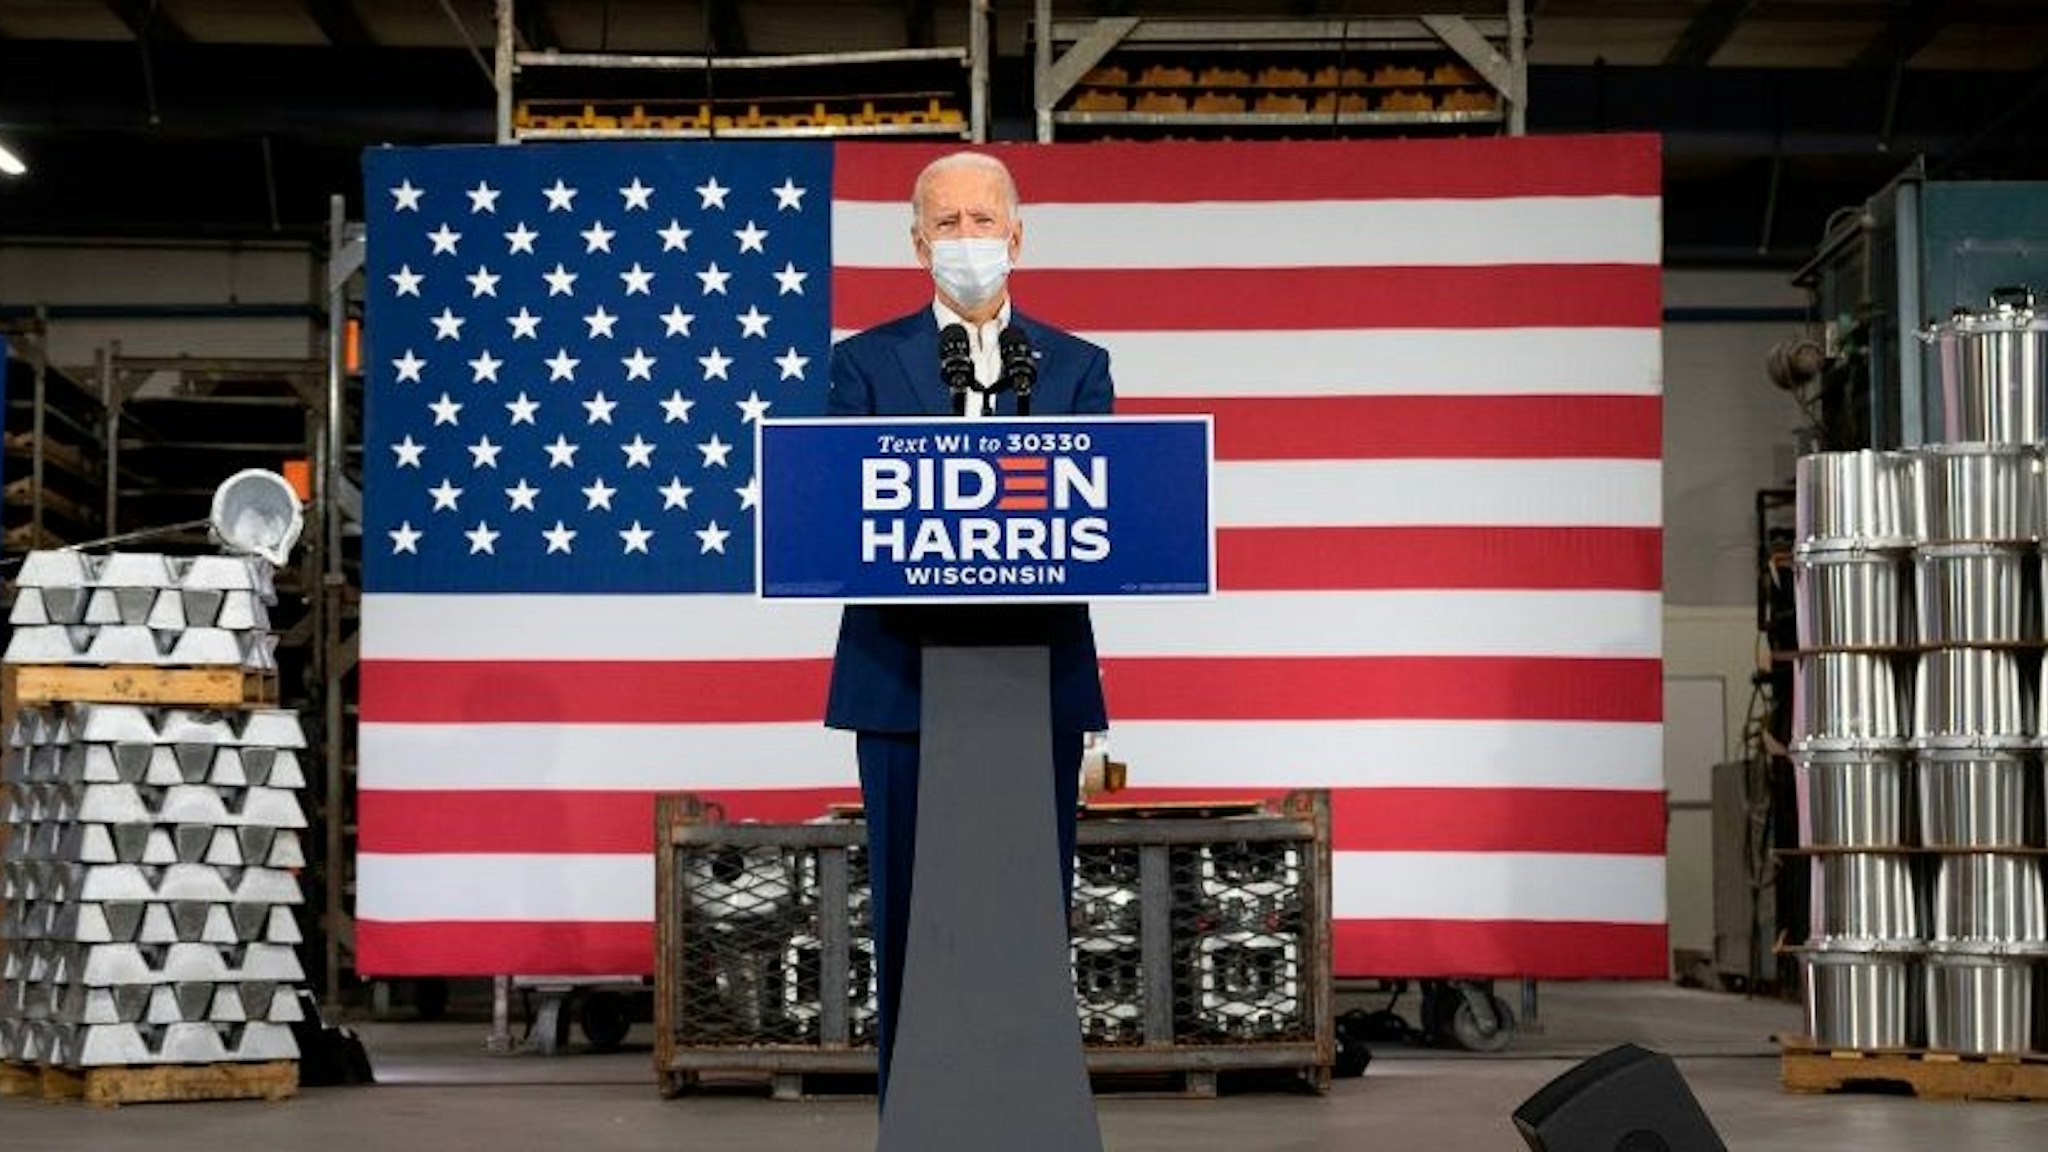 Democratic Presidential Candidate Joe Biden delivers remarks at an aluminum manufacturing facility in Manitowoc, Wisconsin, on September 21, 2020. (Photo by JIM WATSON / AFP) (Photo by